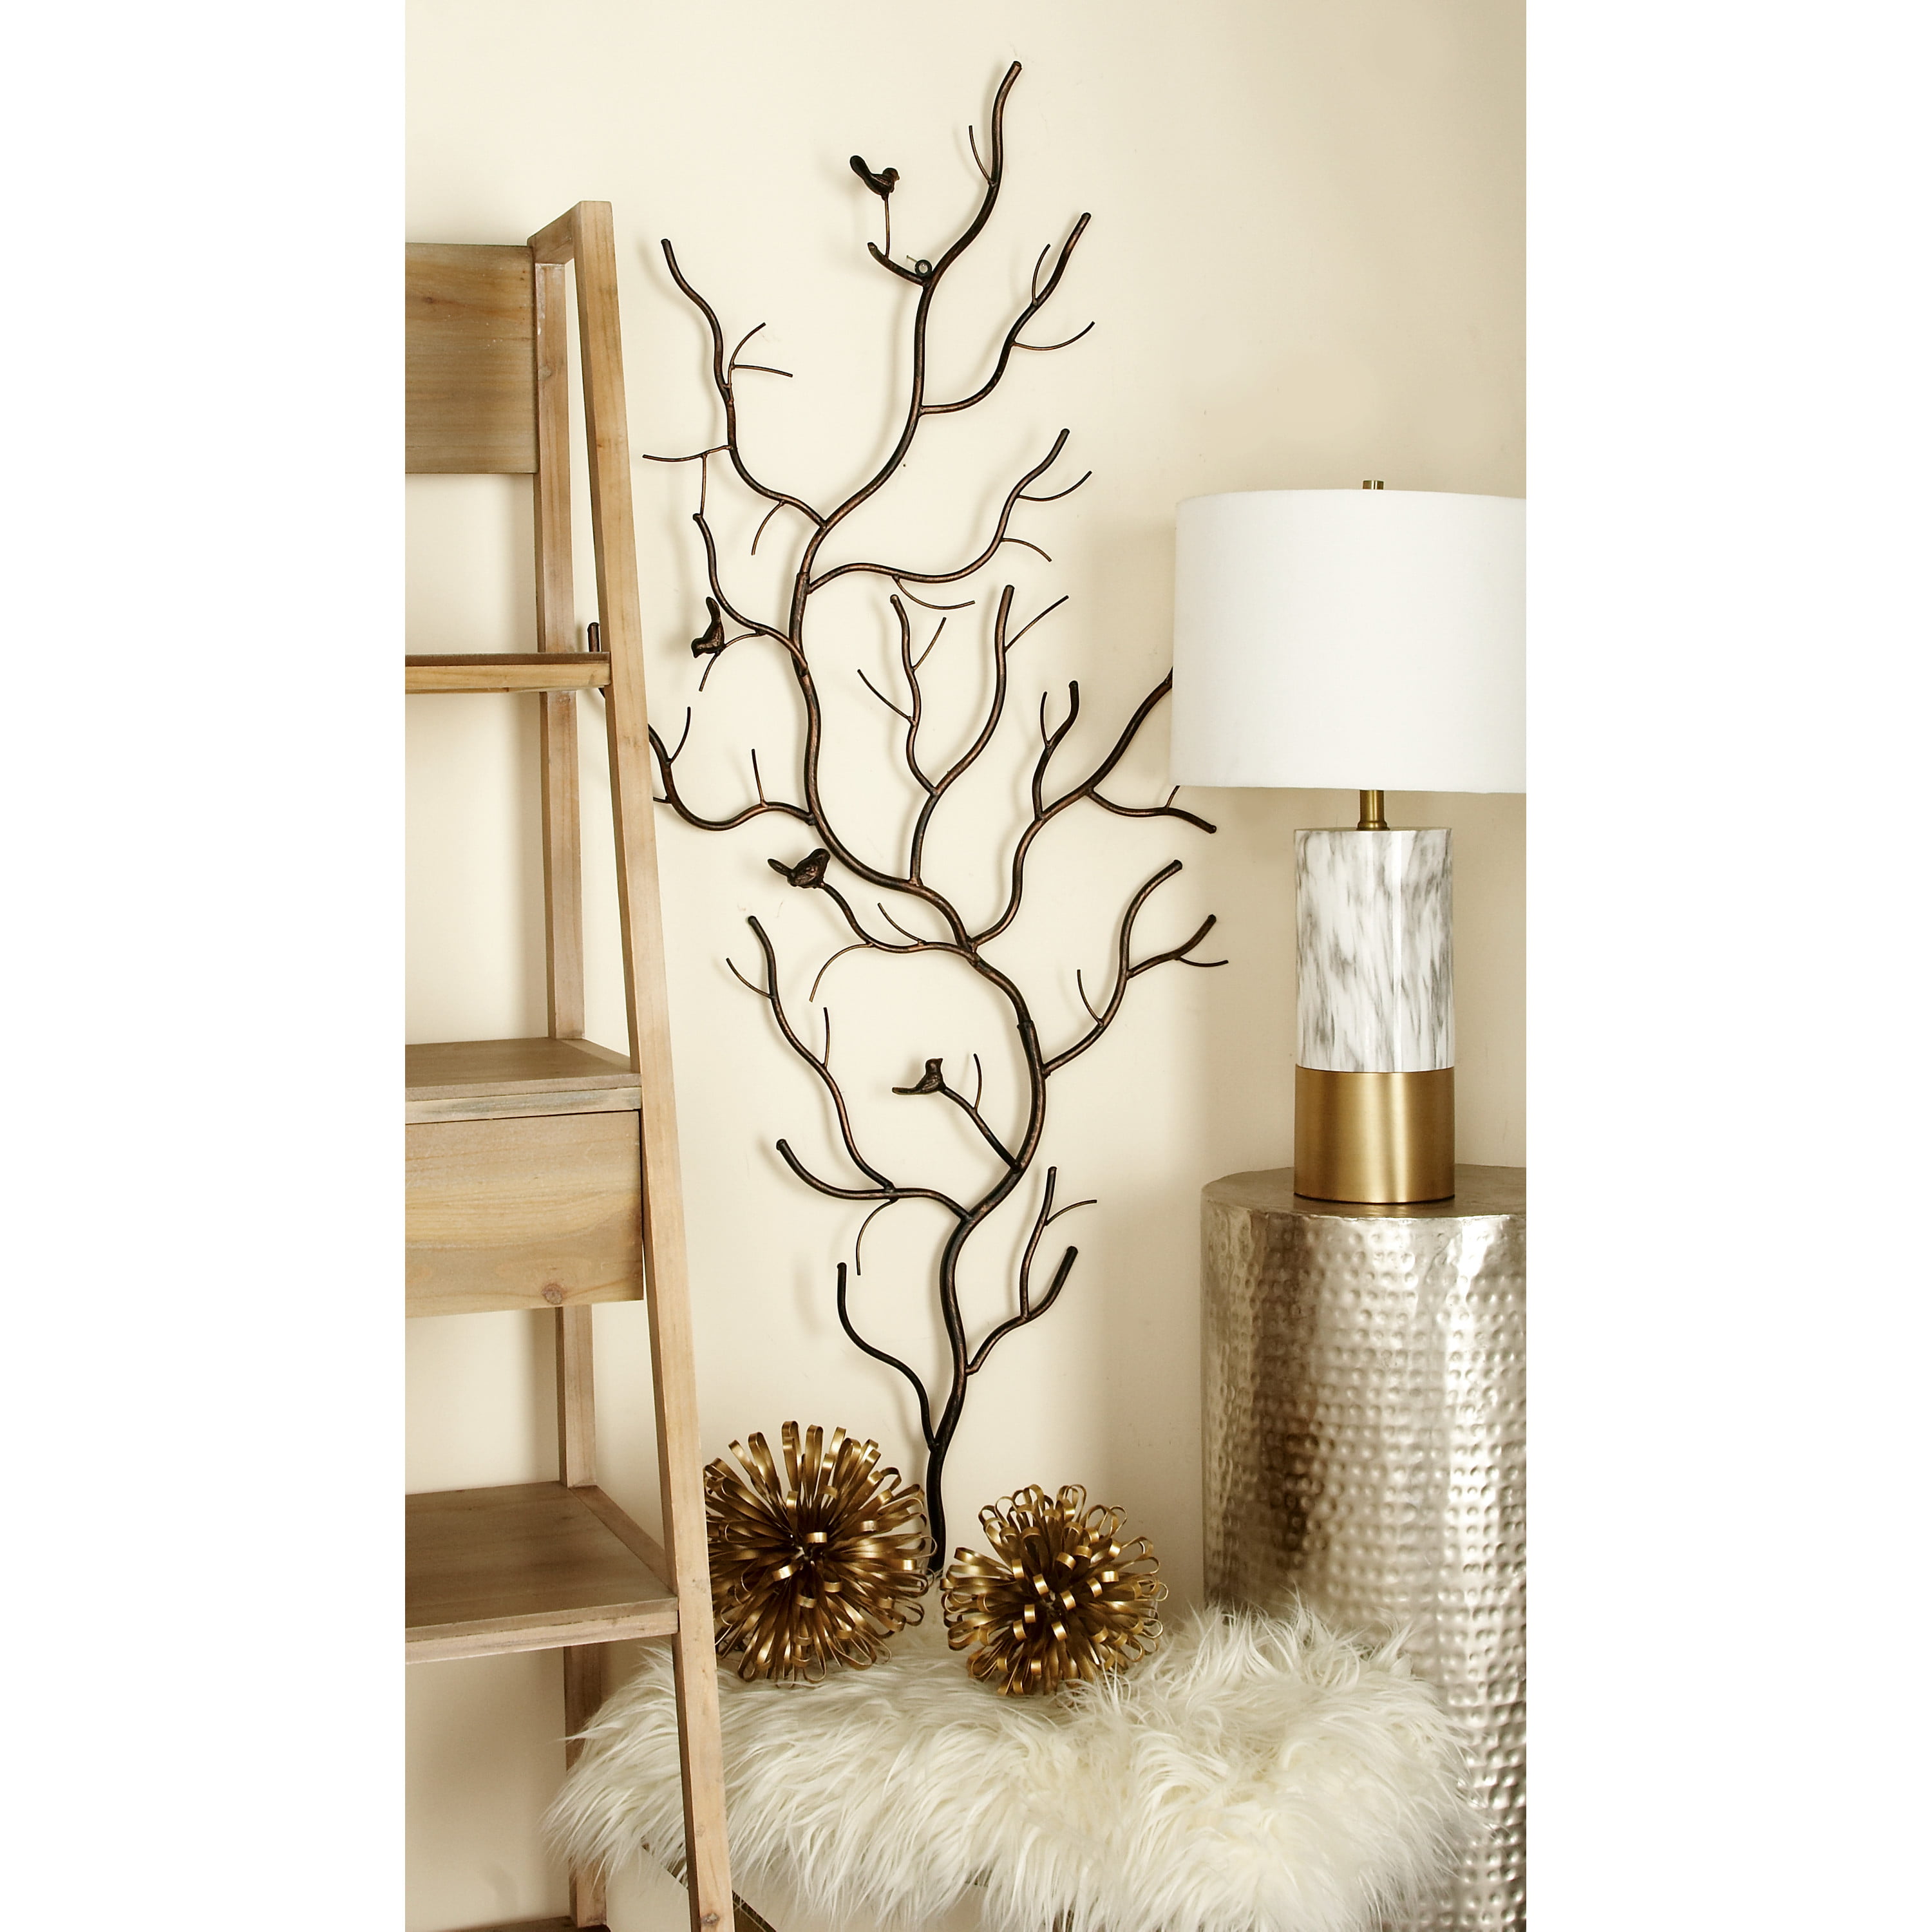 Lighted Branches - The DIY Decorator's Dream!